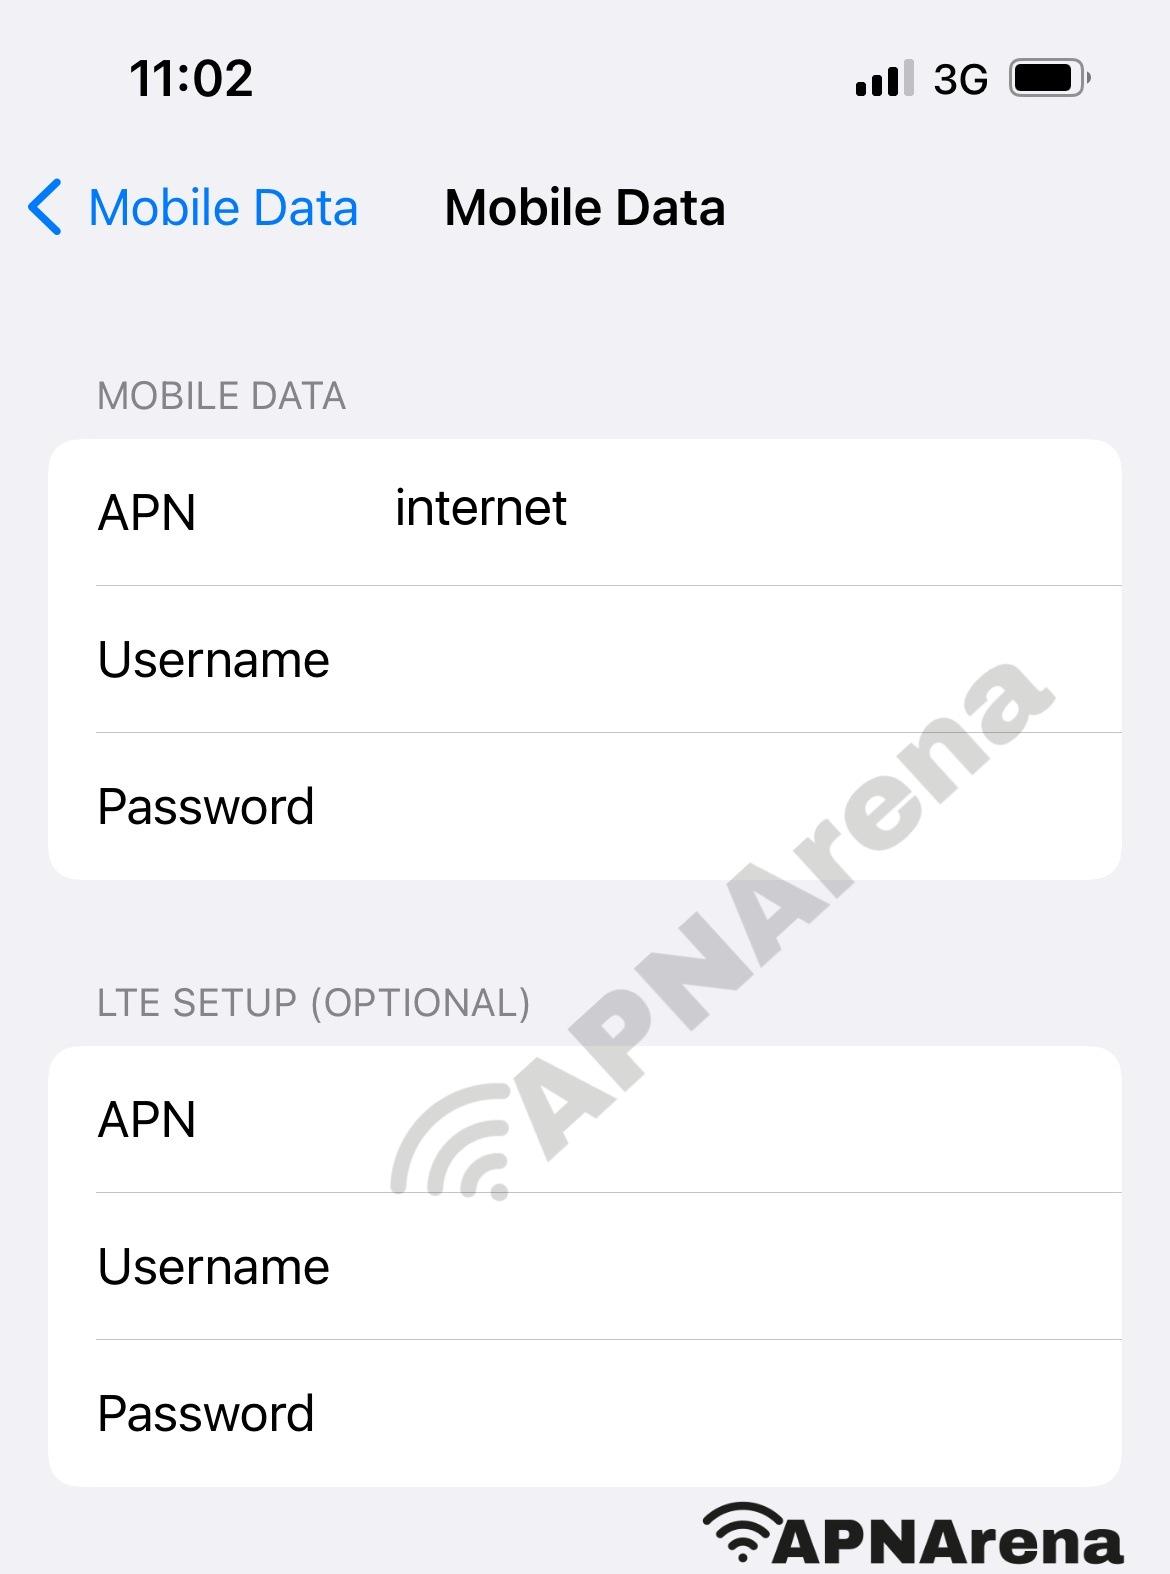 7-Eleven Speak out APN Settings for iPhone